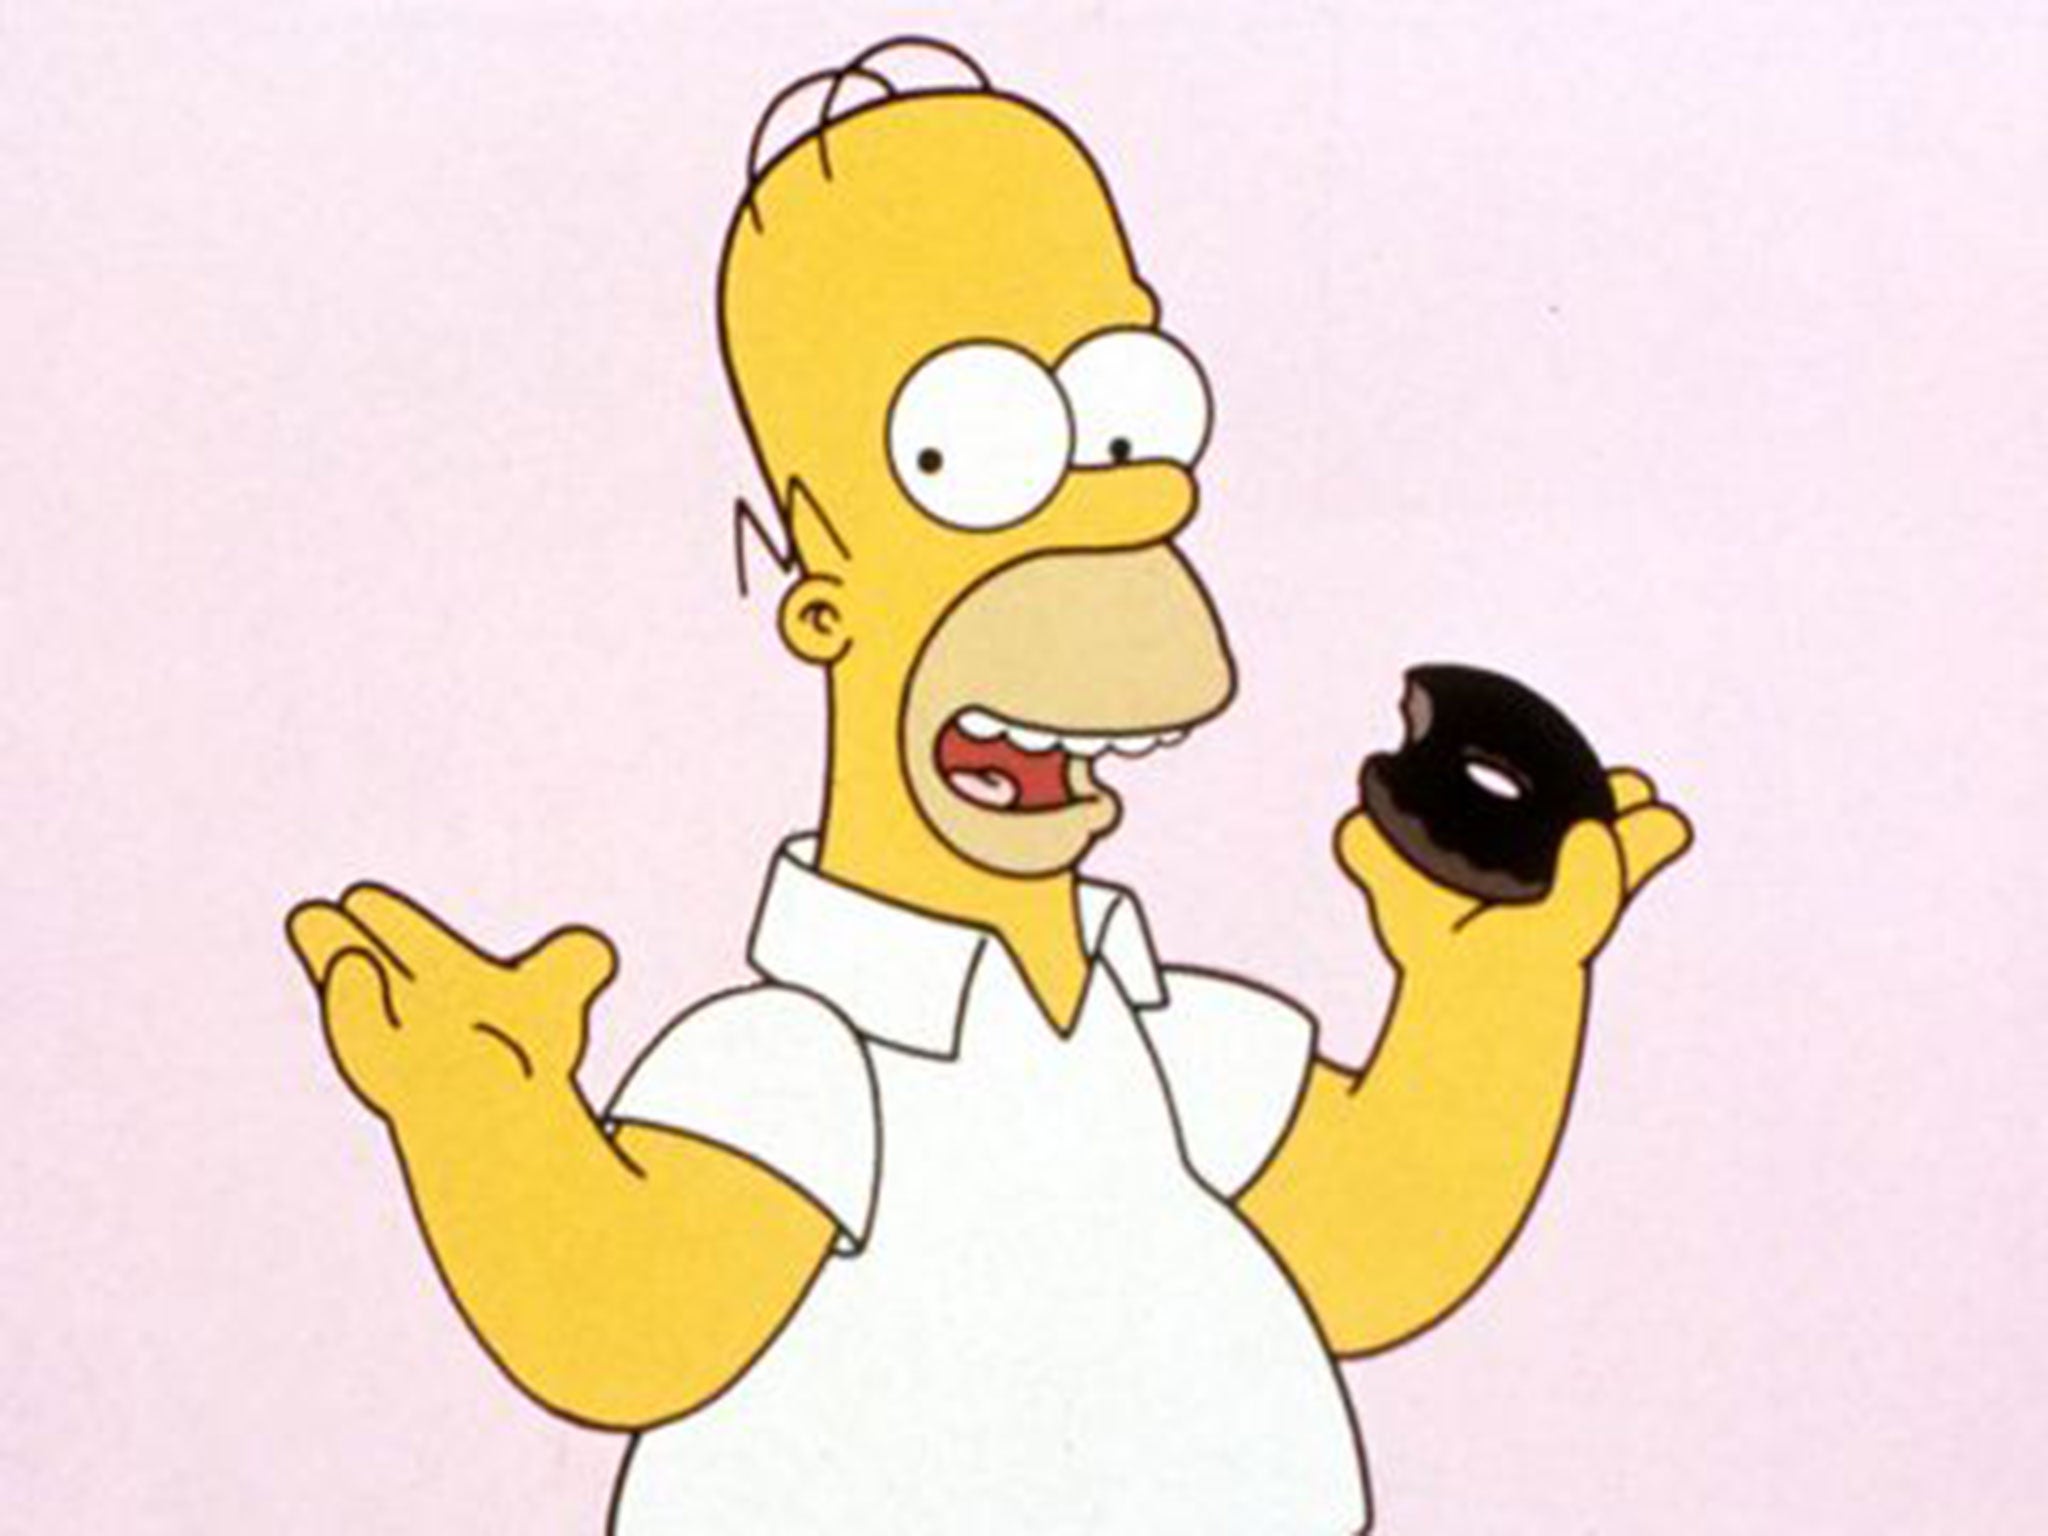 Homer Simpson isn't going anywhere until at least the 28th run of The Simpsons